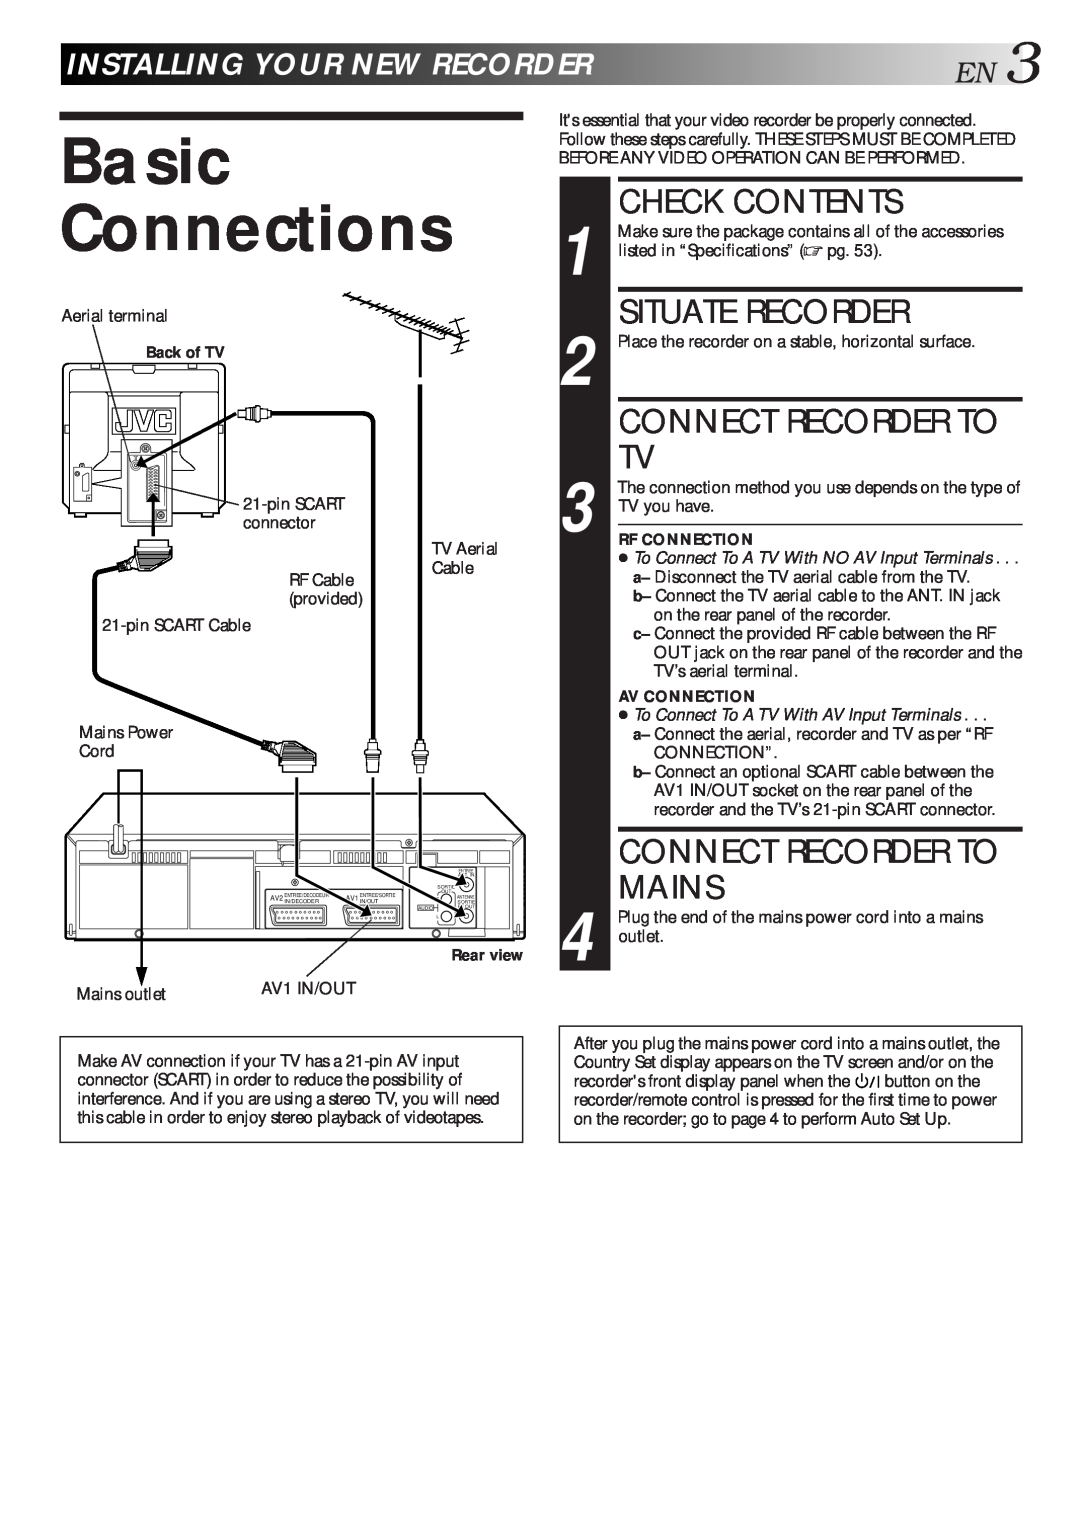 JVC HR-J713EU Basic Connections, Check Contents, Situate Recorder, Connect Recorder To Mains, Installingyournewrecorder 